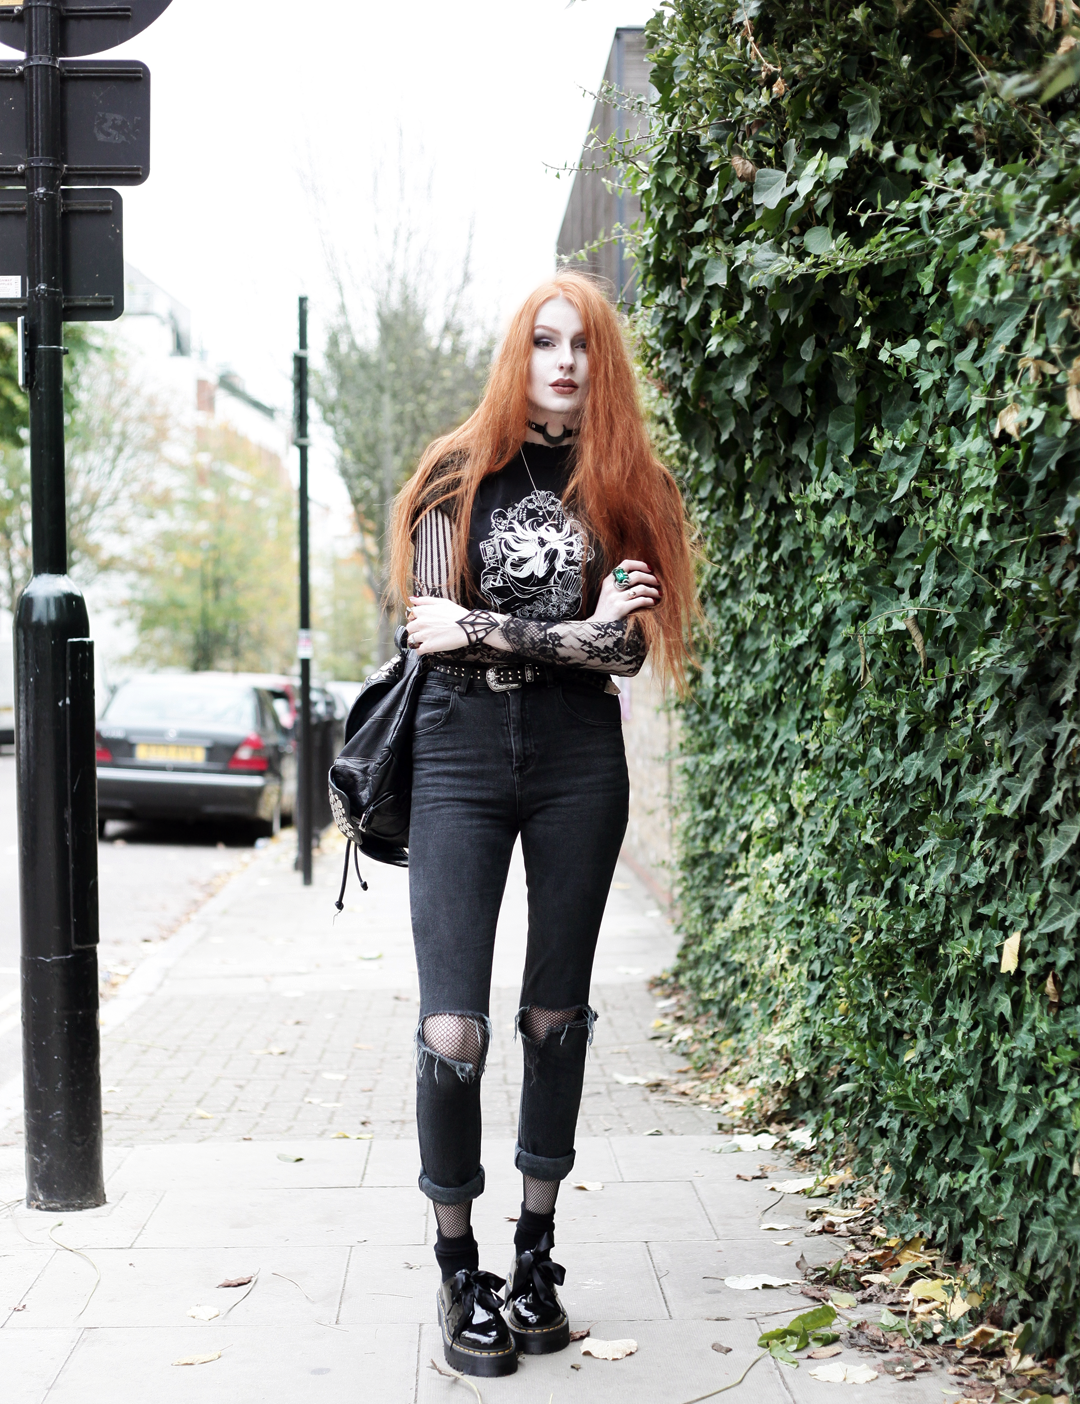 Olivia Emily wears CosQueen Black Mirror Princess Tee, Motel Black Lace Top, Asos Western Belt, Asos High Waisted Ripped Jeans, Dr Martens Patent Holly Shoes